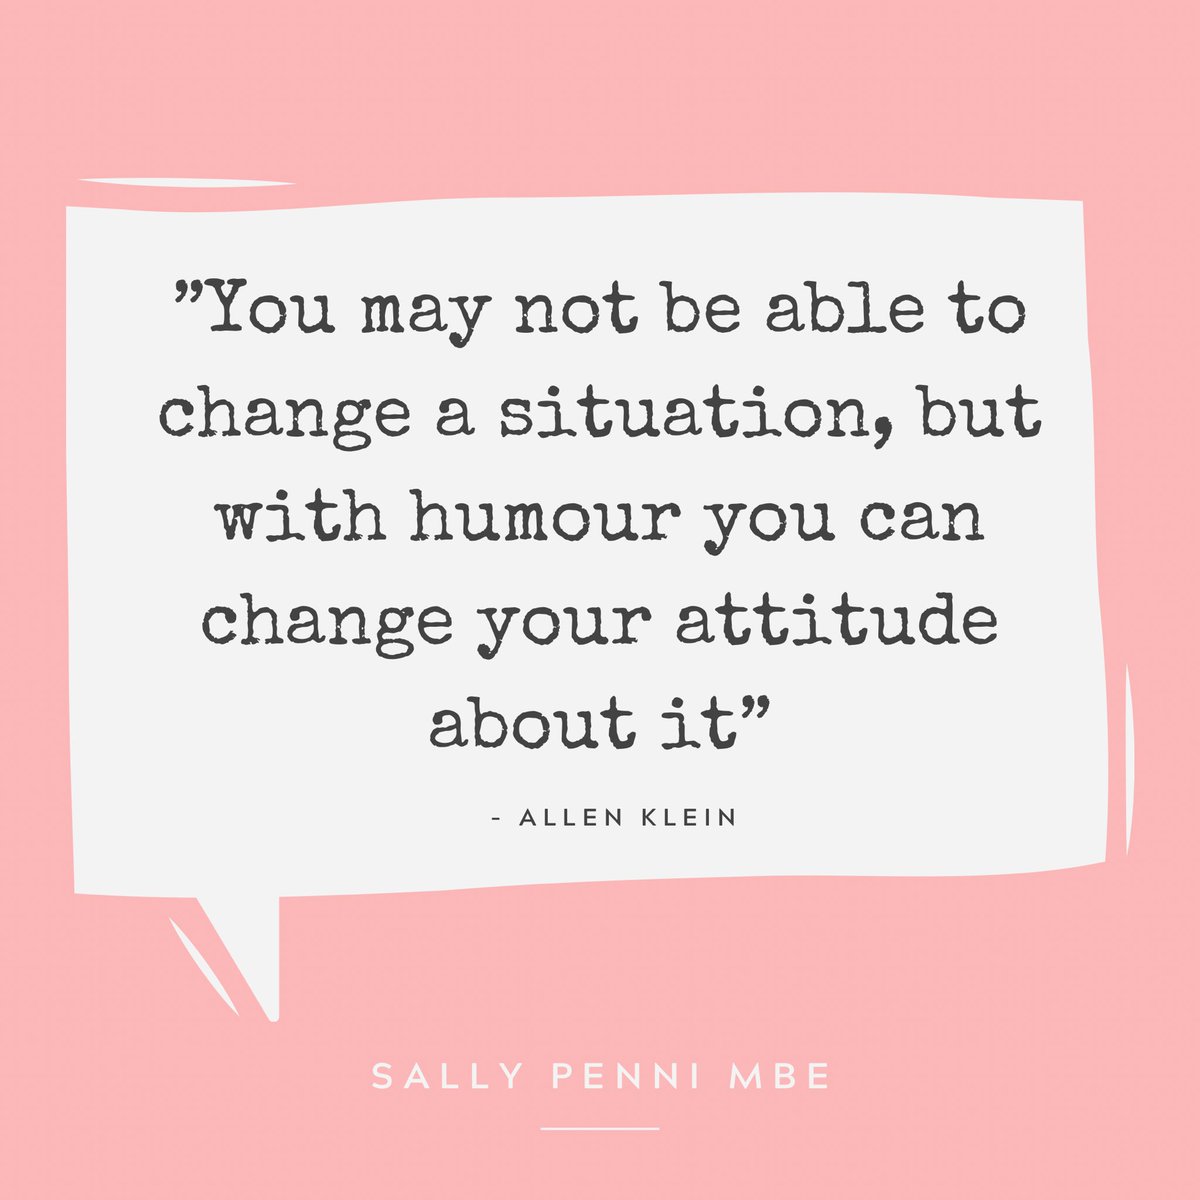 100%! Humour saves us from so many situations. If you don’t laugh, then you’ll cry 🤣

#sallypennimbe #law #lawyer #lifeofalawyer #barrister #author #quoteoftheday #truestory #laughter #laughing #comedy #humor #characteristic #humour  #allenklein #attitude